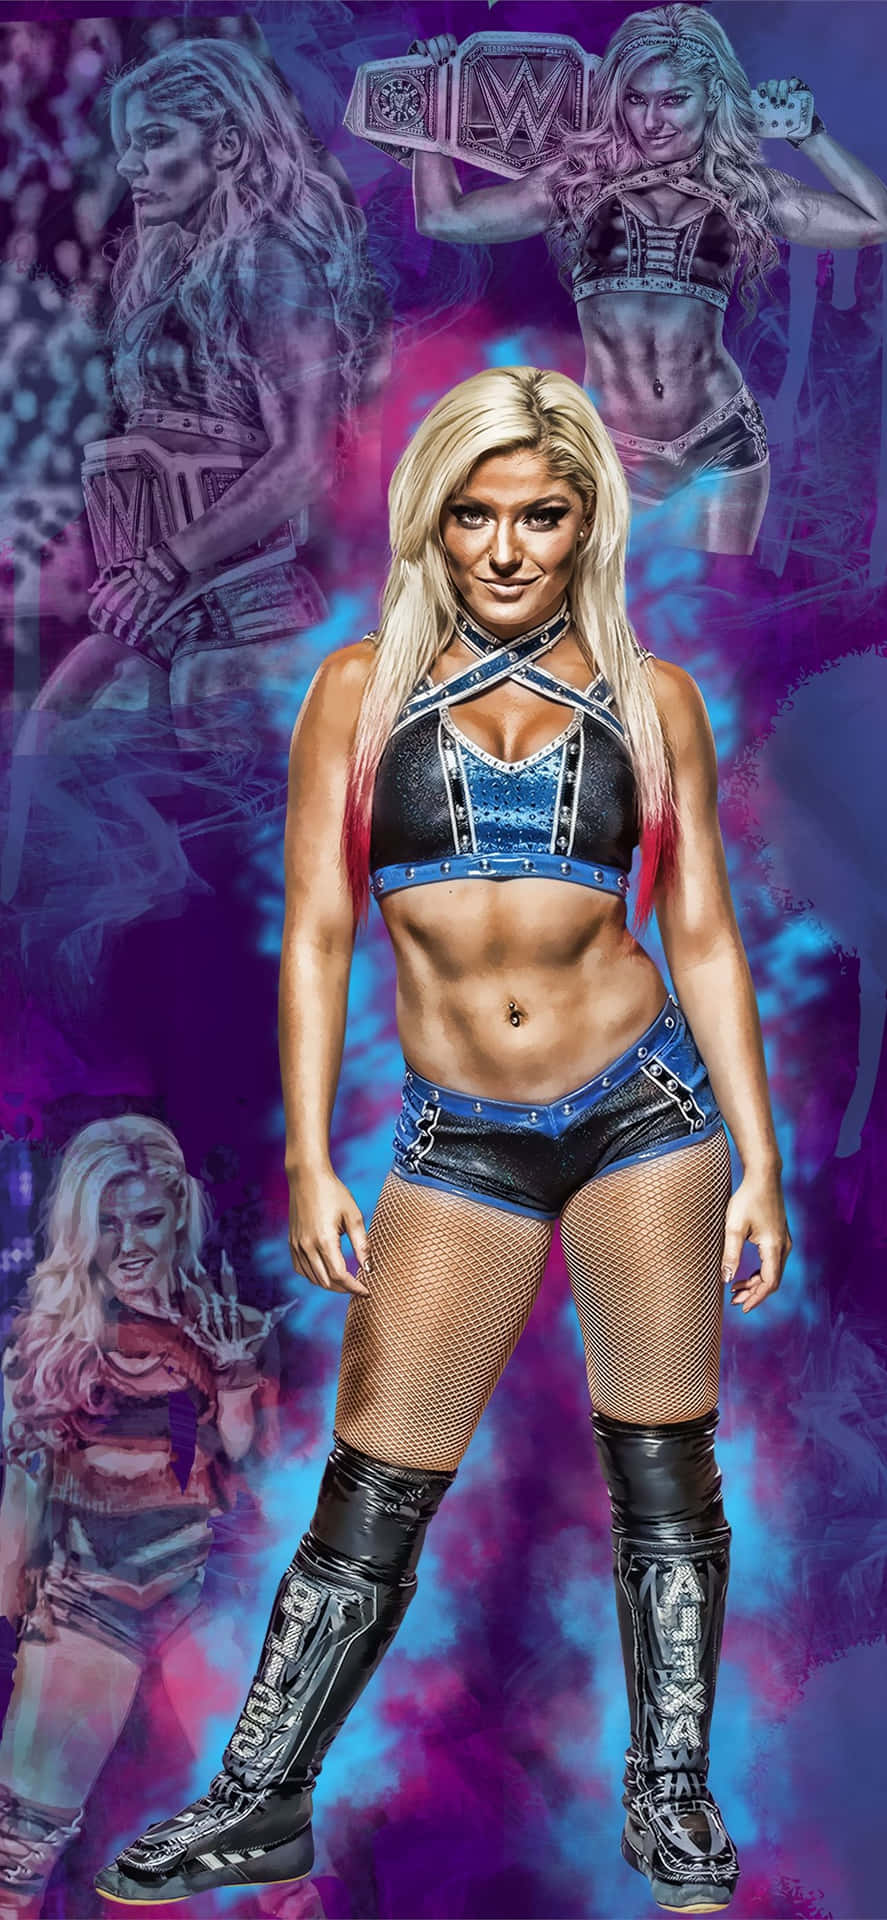 Wwe Wrestler In Purple And Blue Outfit Wallpaper